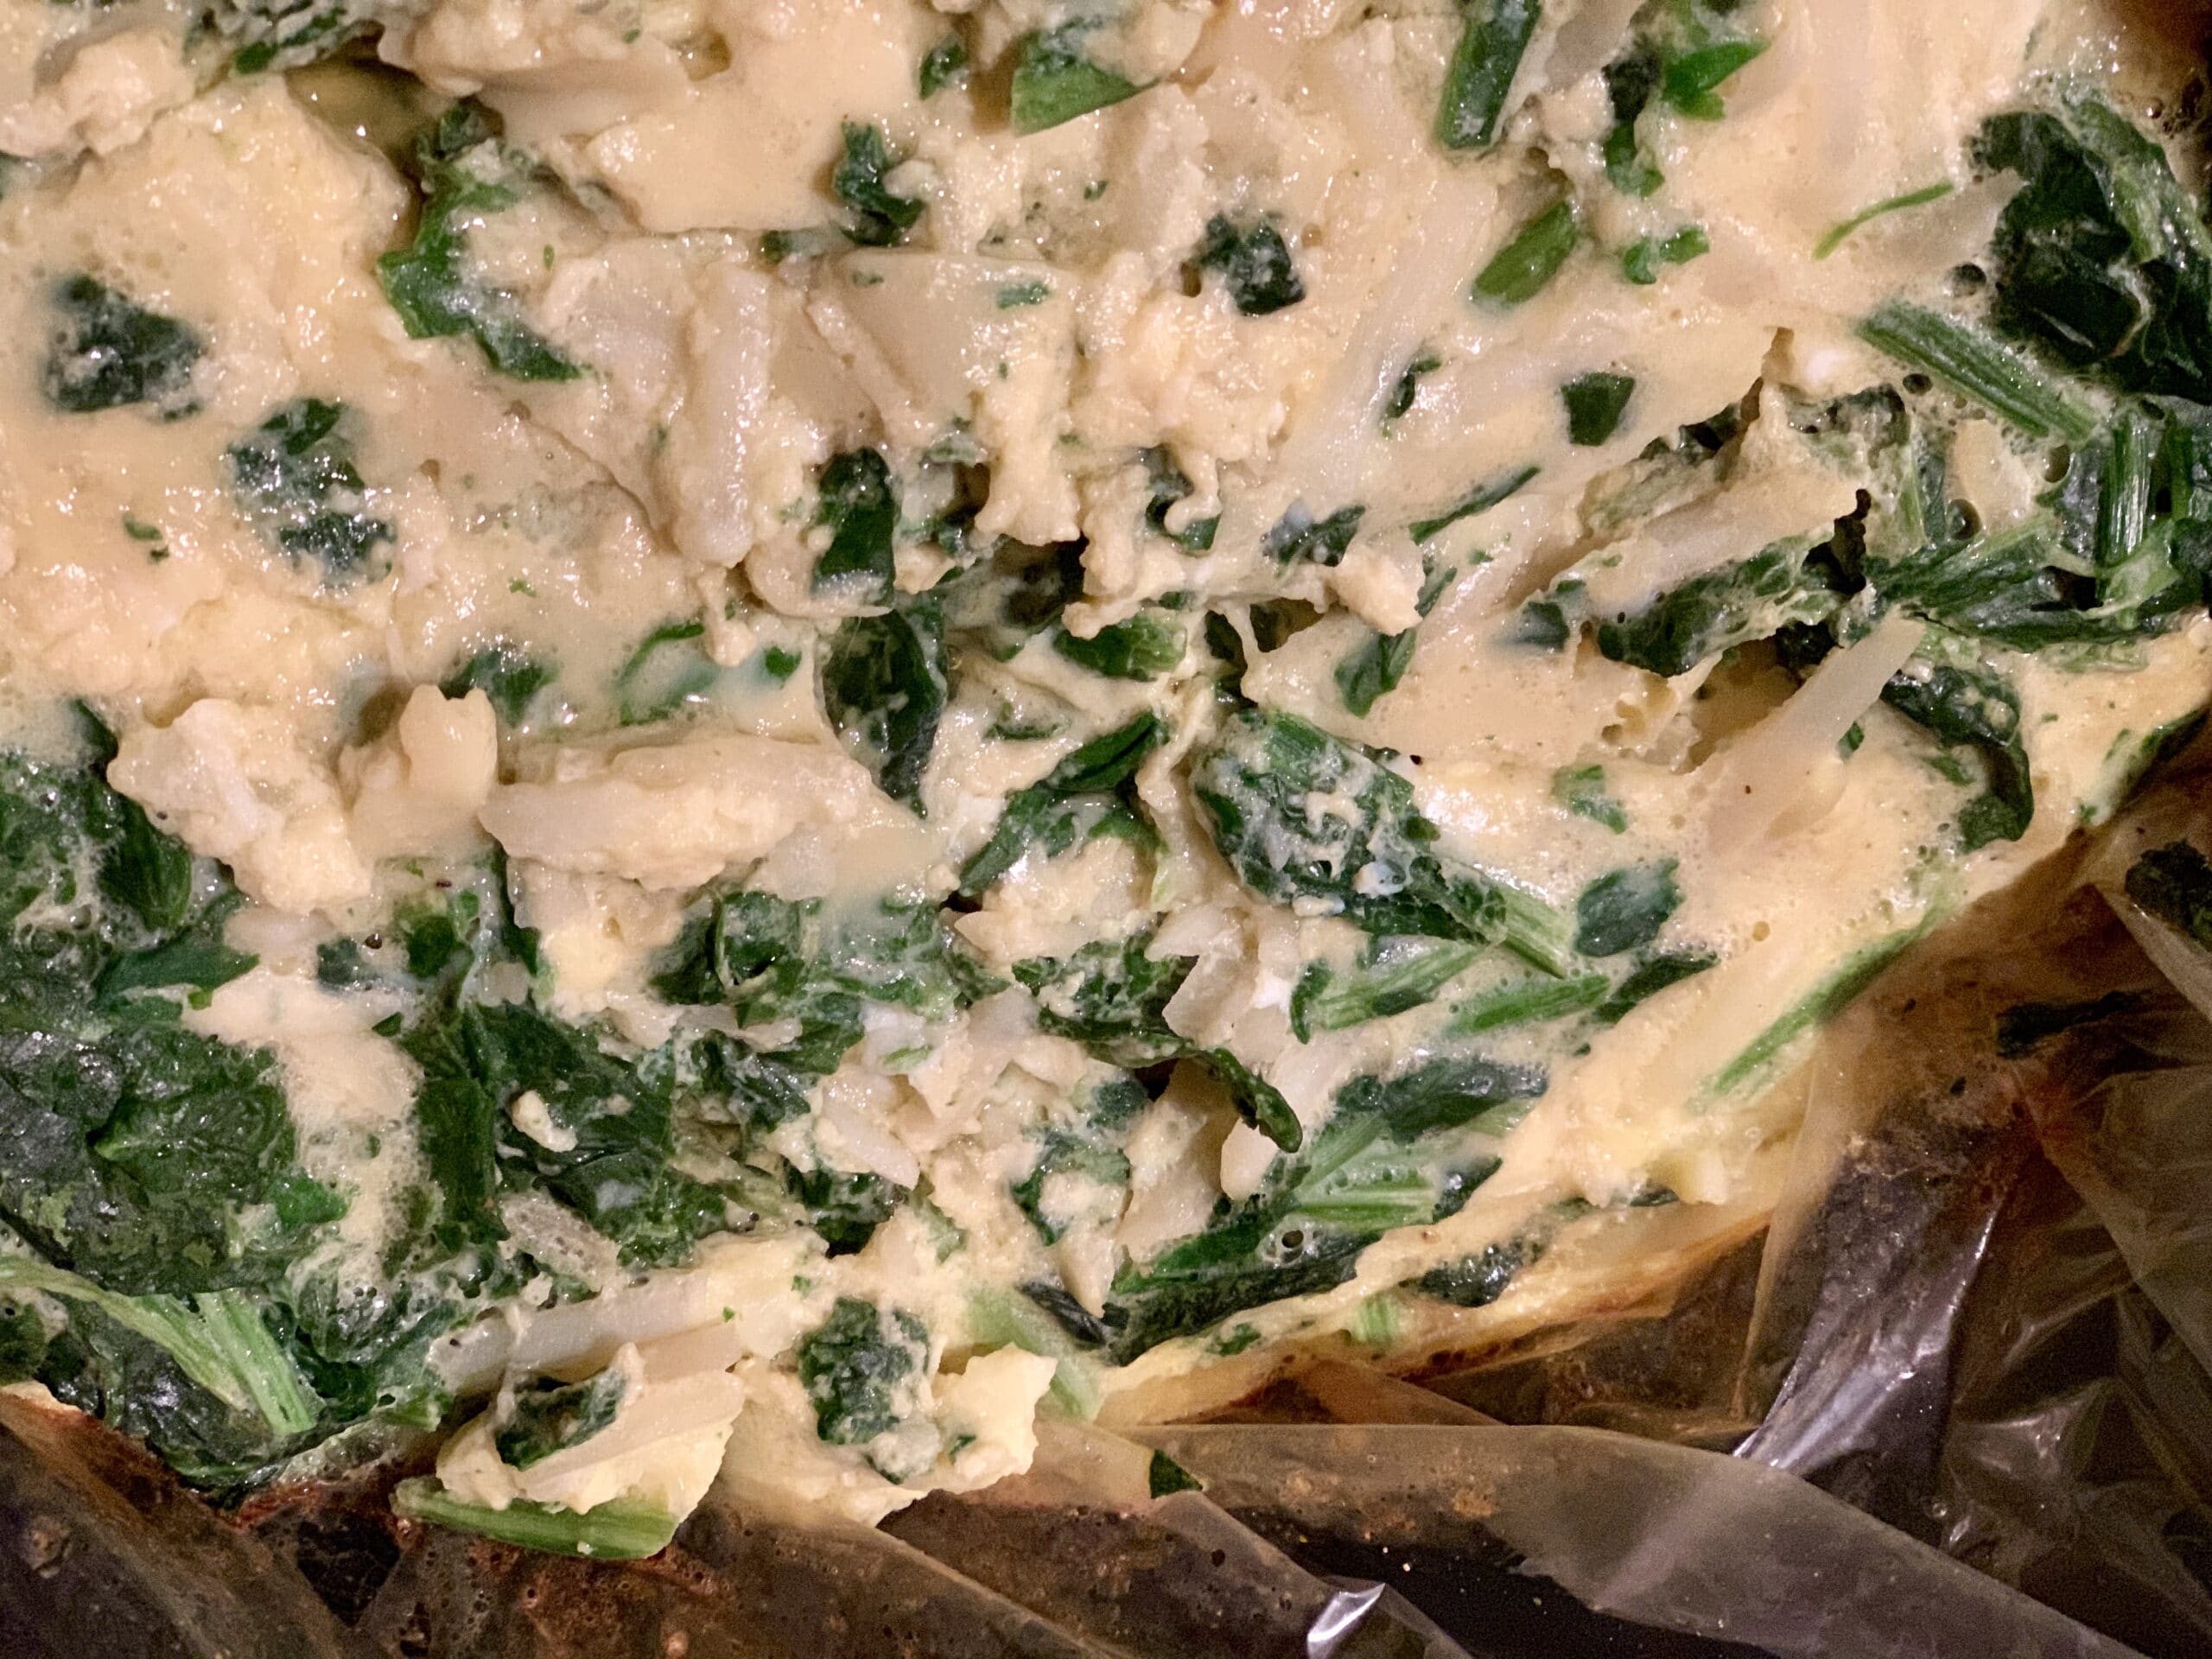 cooked frittata of eggs spinach and potato